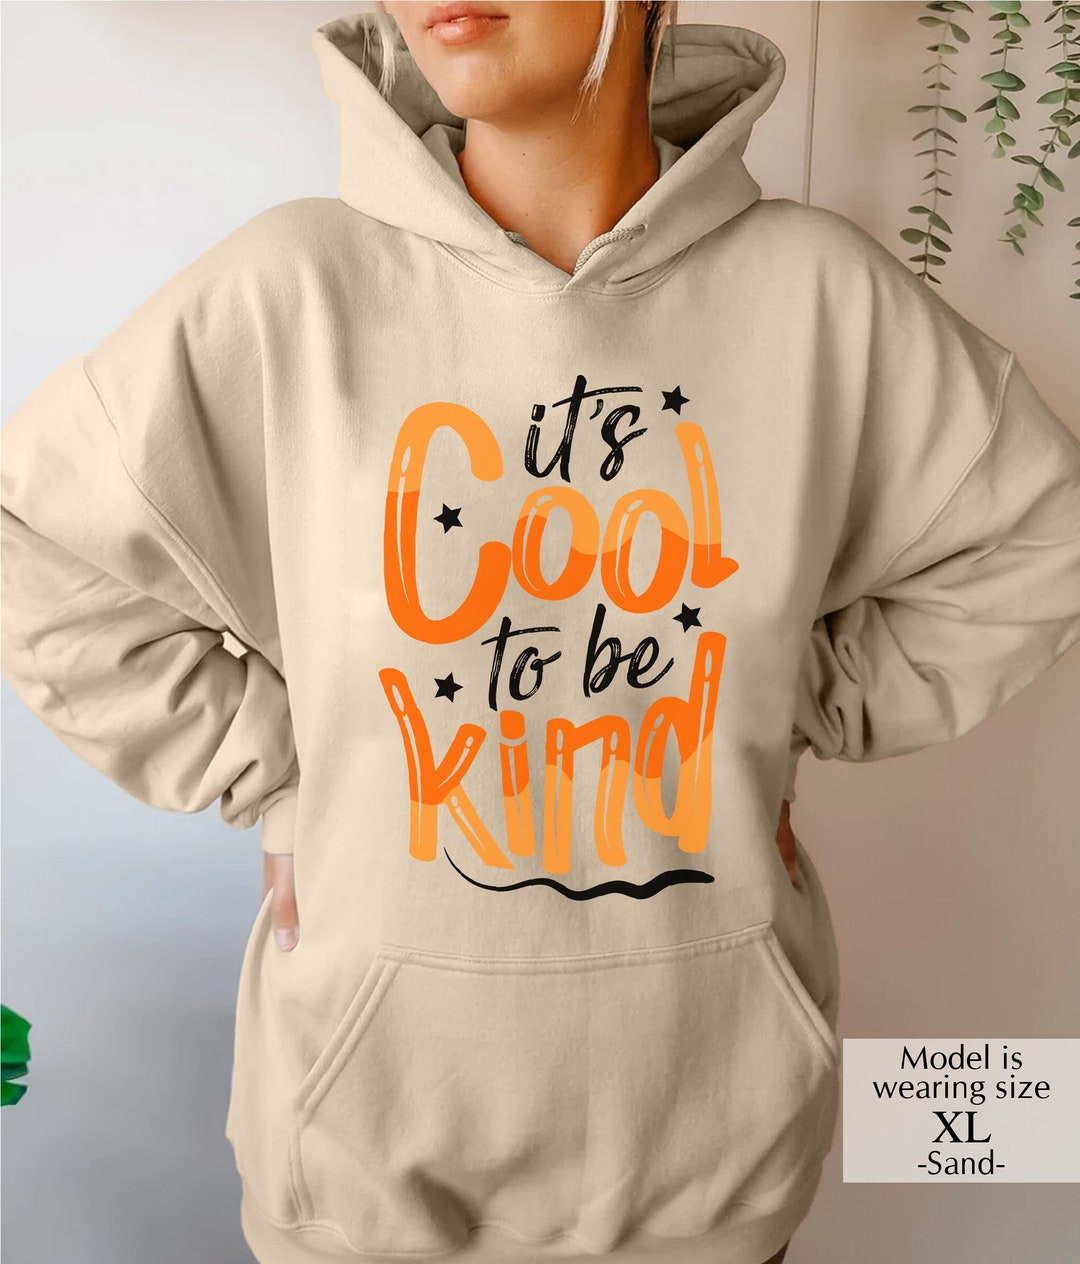 It's Cool to Be Kind Hoodies Kindness Hooded Sweatshirt - Etsy